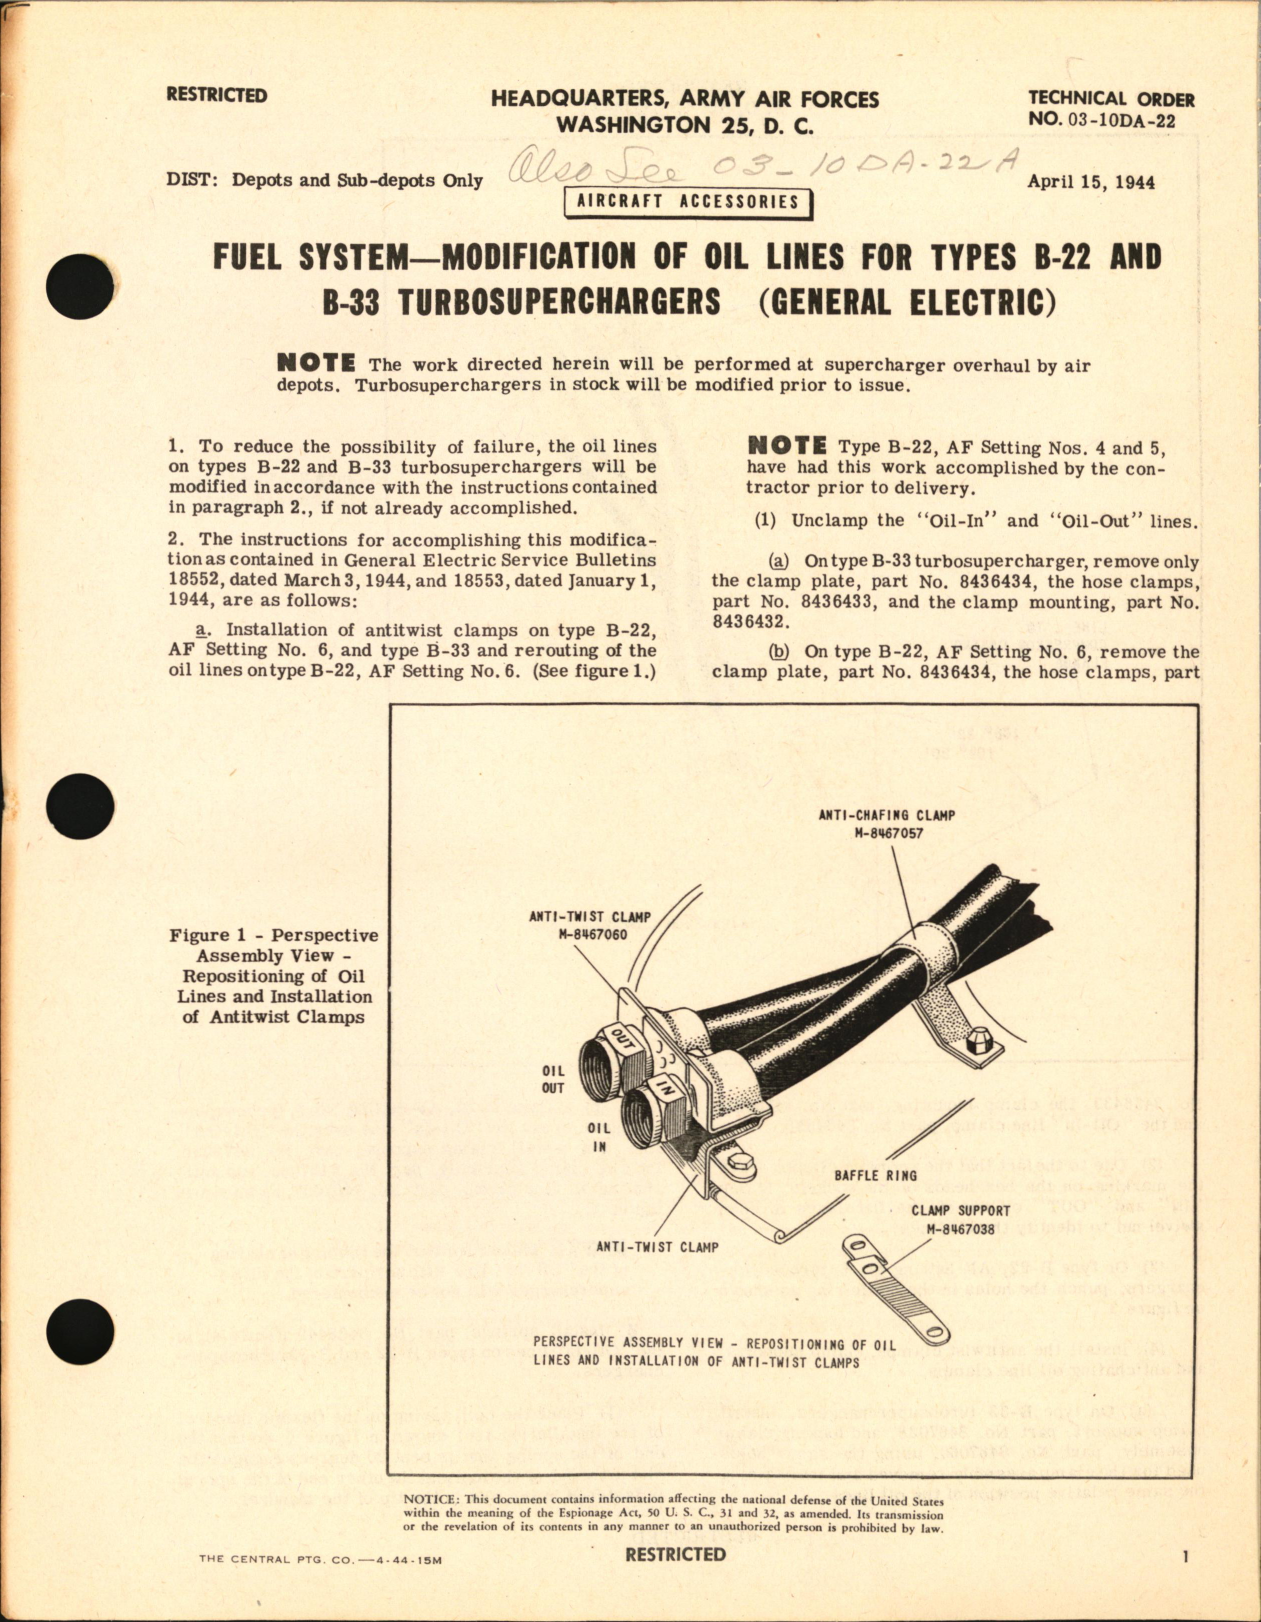 Sample page 1 from AirCorps Library document: Modification of Oil Lines for Types B-22 and B-33 Turbosuperchargers